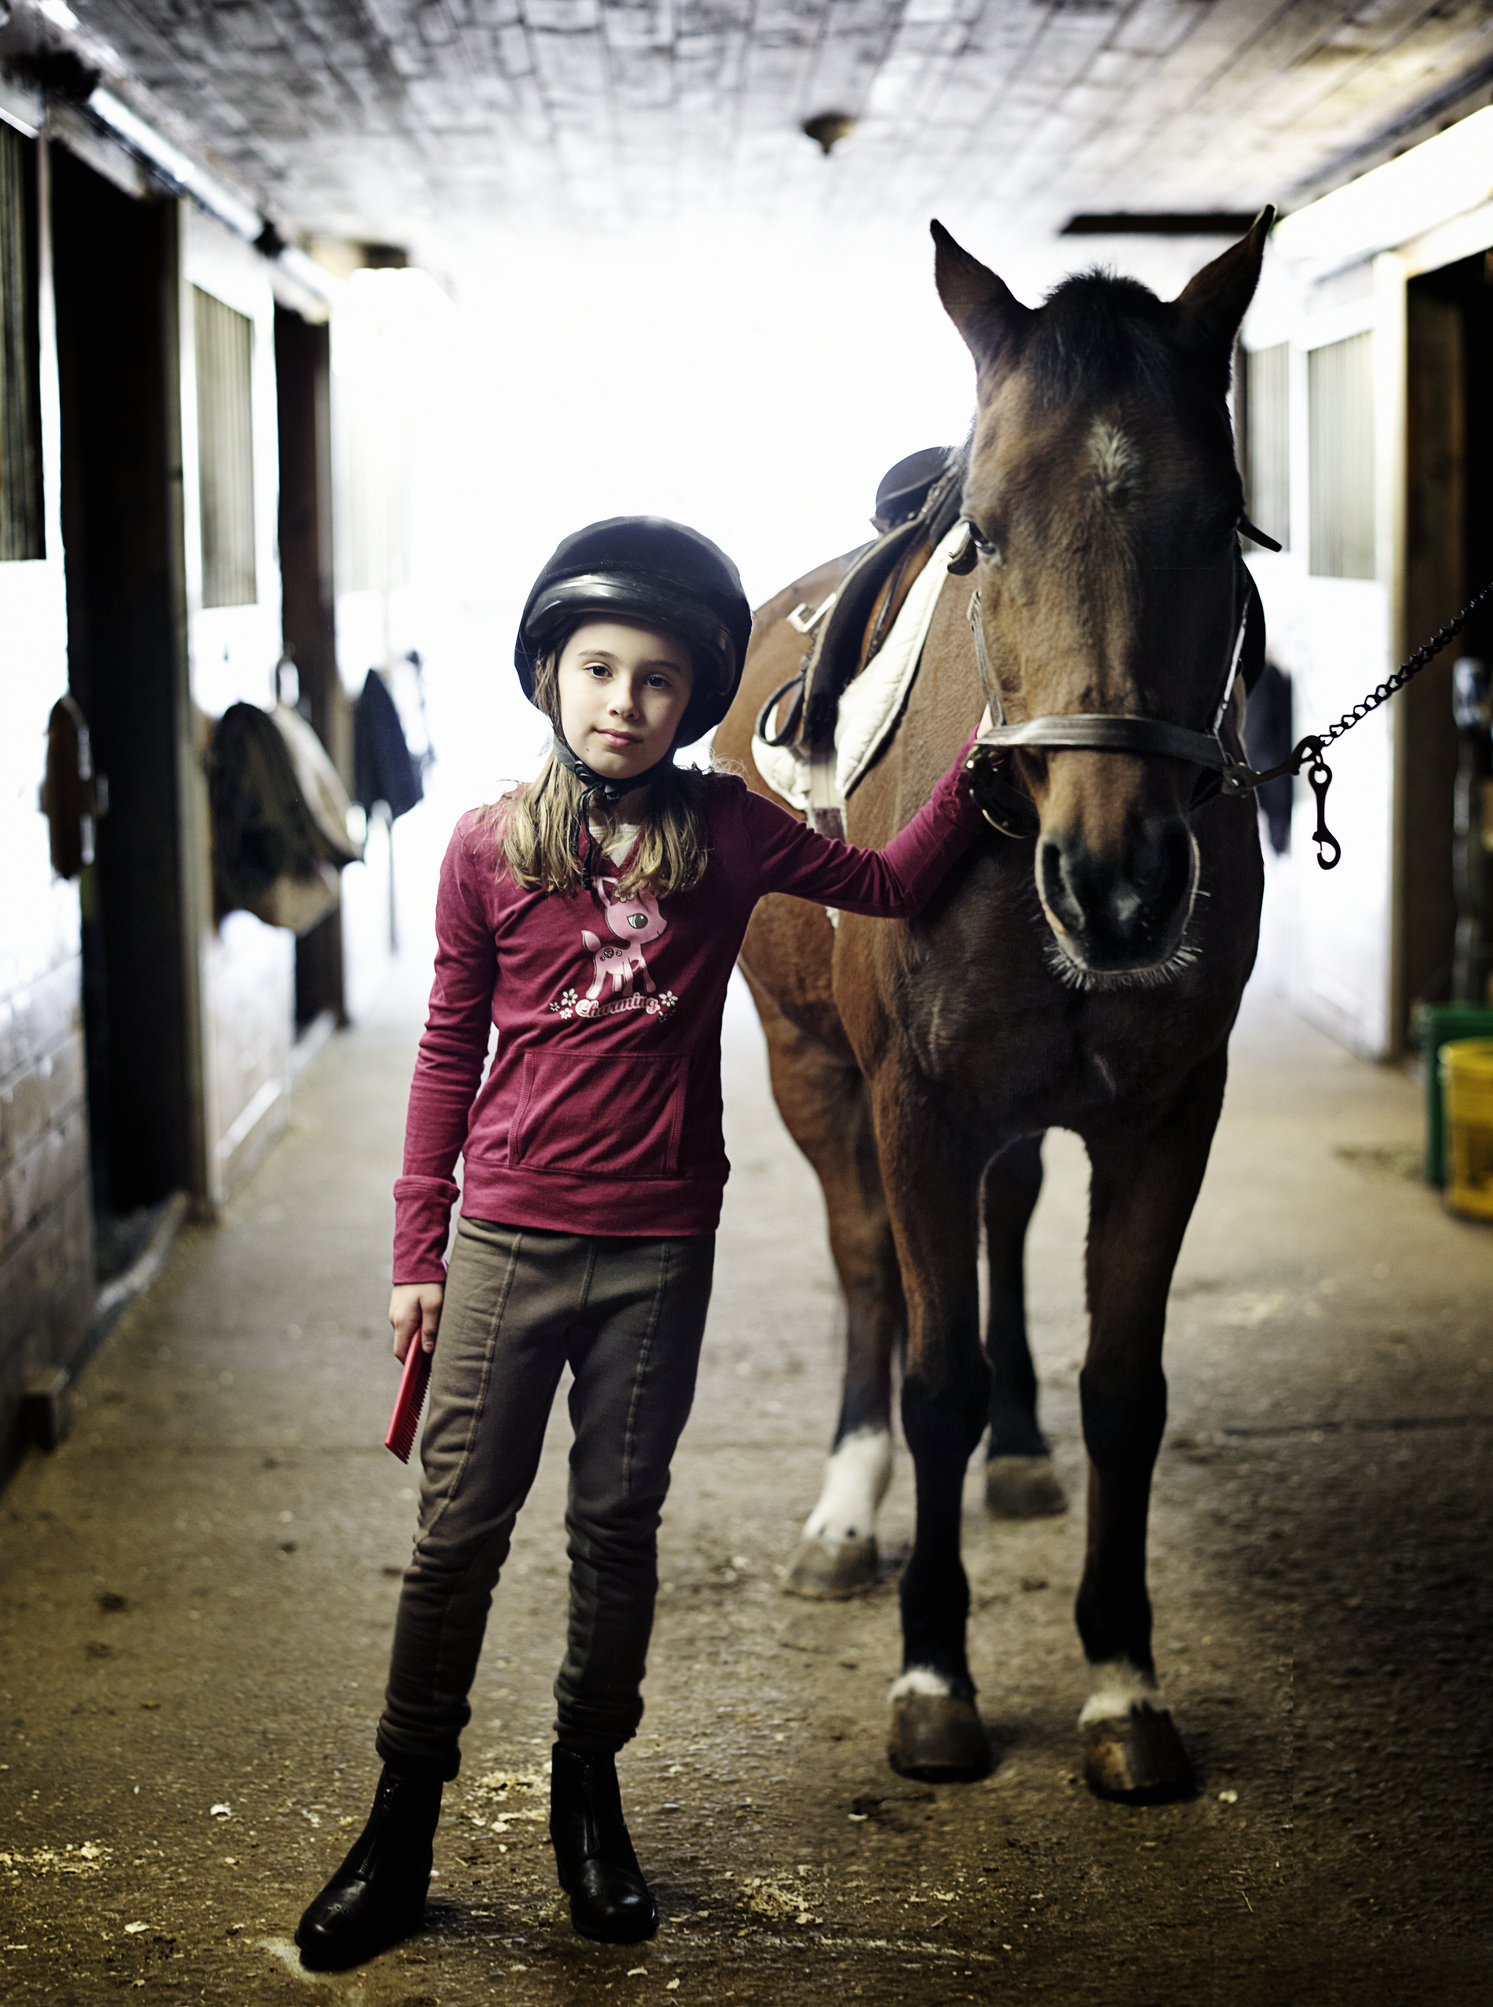 Child in riding helmet stands next to a horse in a stable